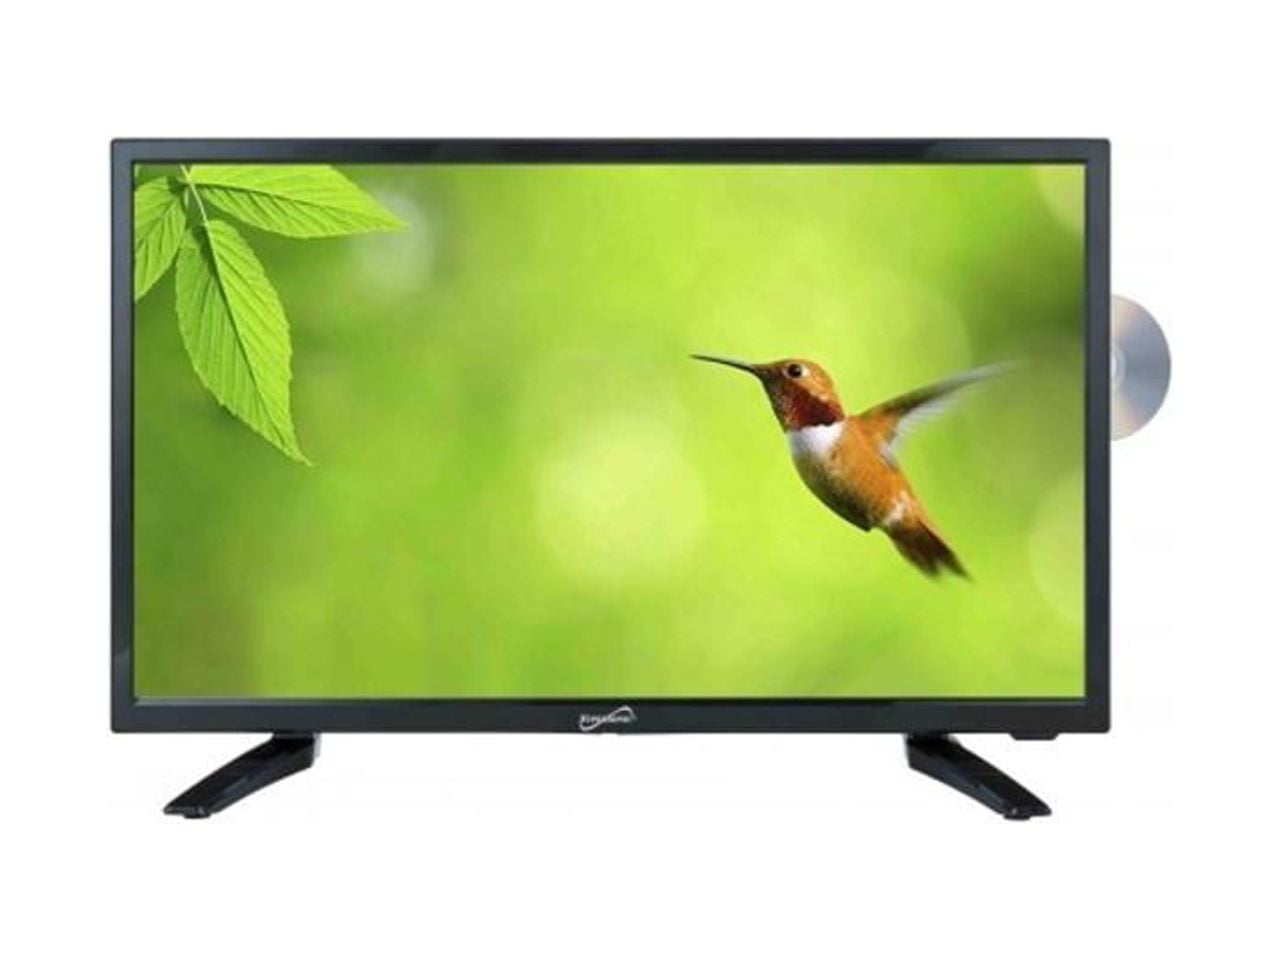 19 Supersonic 12 Volt ACDC LED HDTV with DVD Player, USB, SD Card